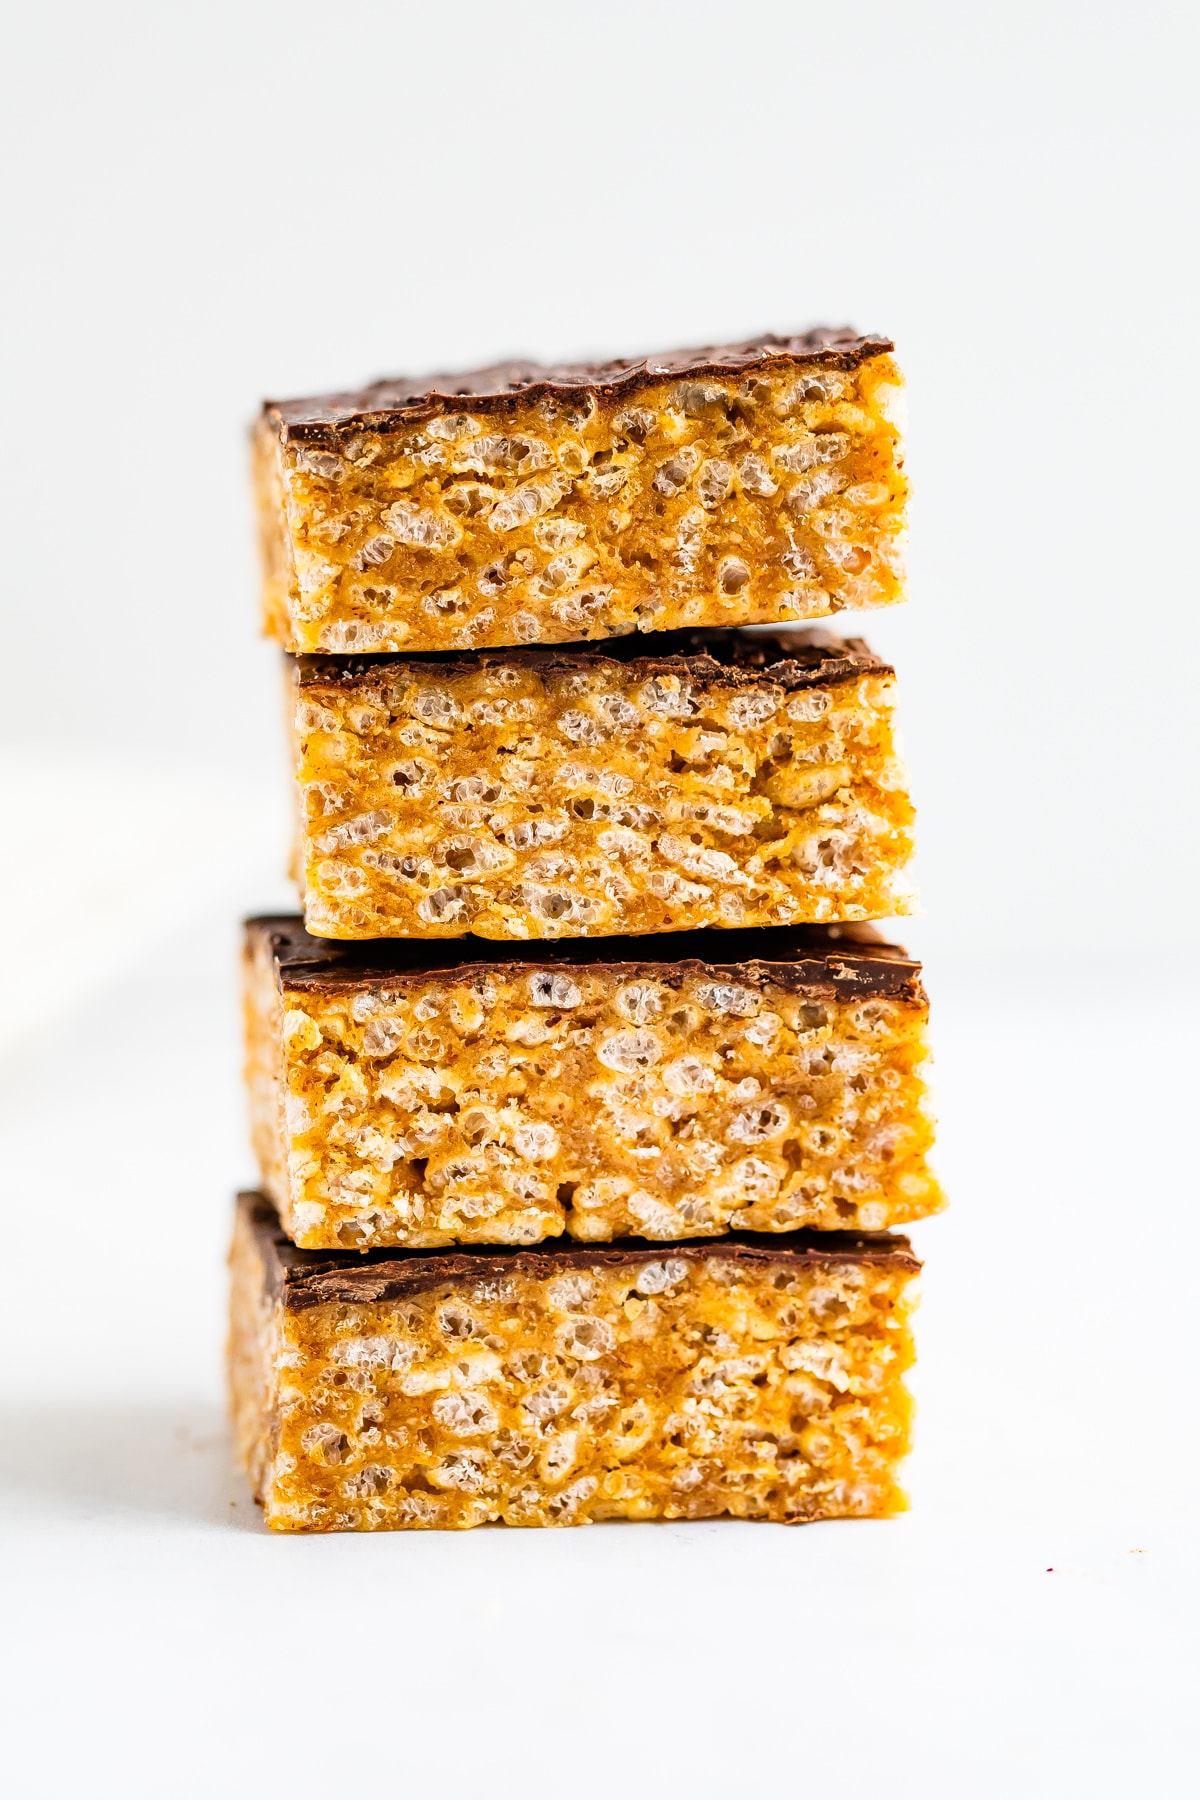 Stack of four rice krispie treats with a layer of chocolate on top.